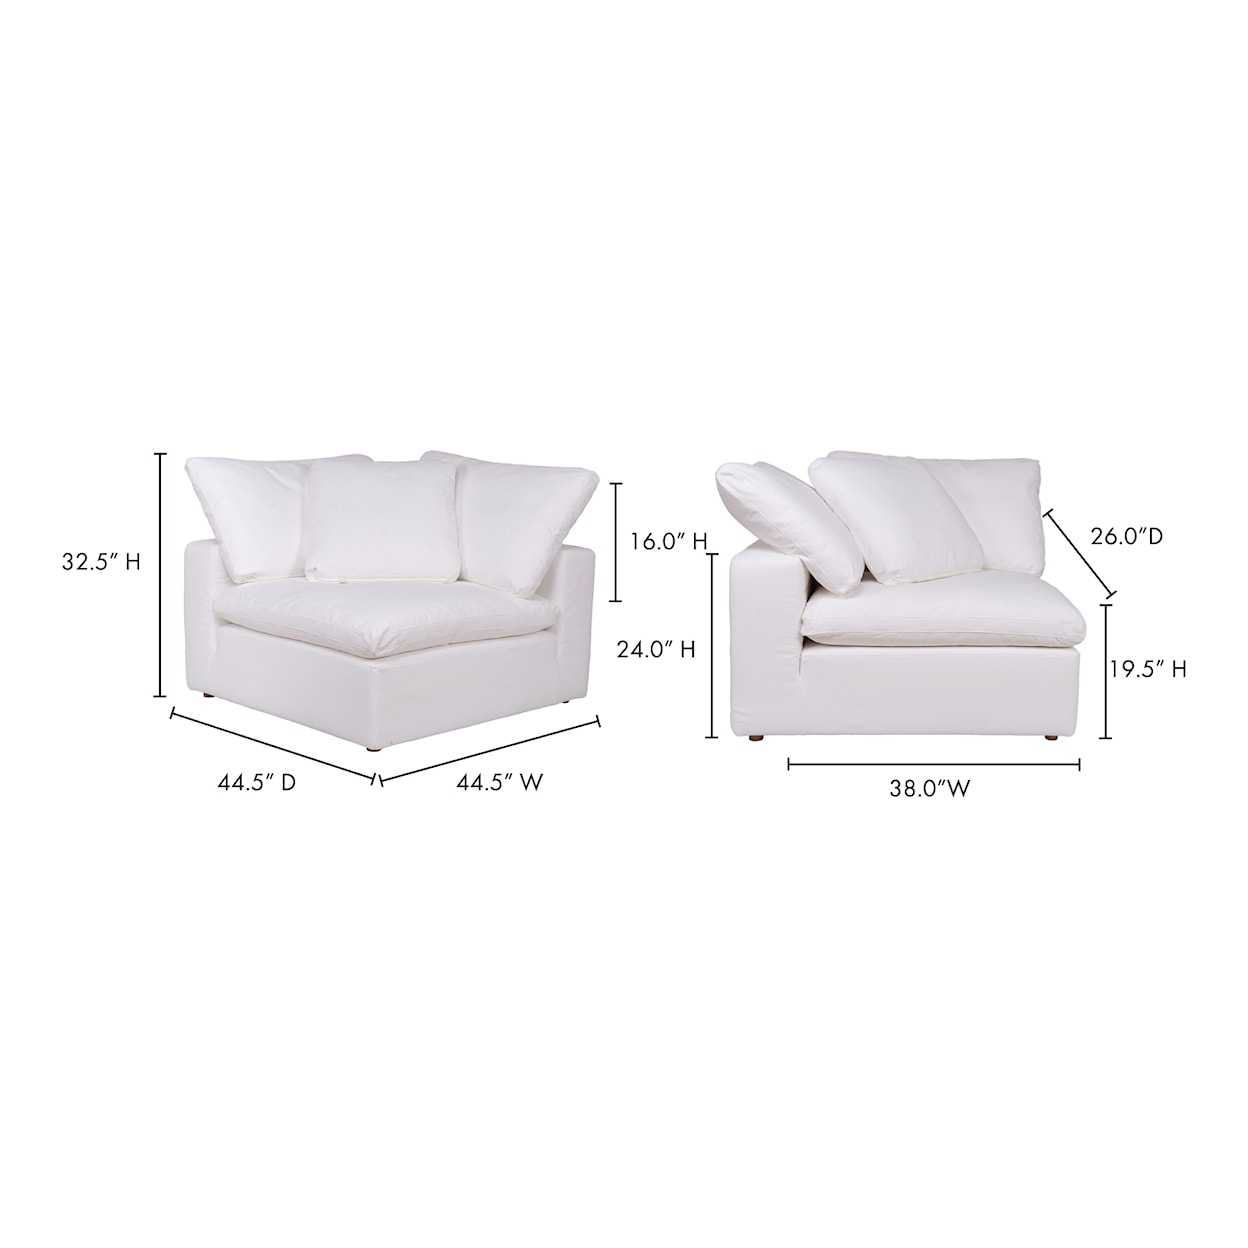 Moe's Home Collection Clay Clay Corner Chair Livesmart Fabric White